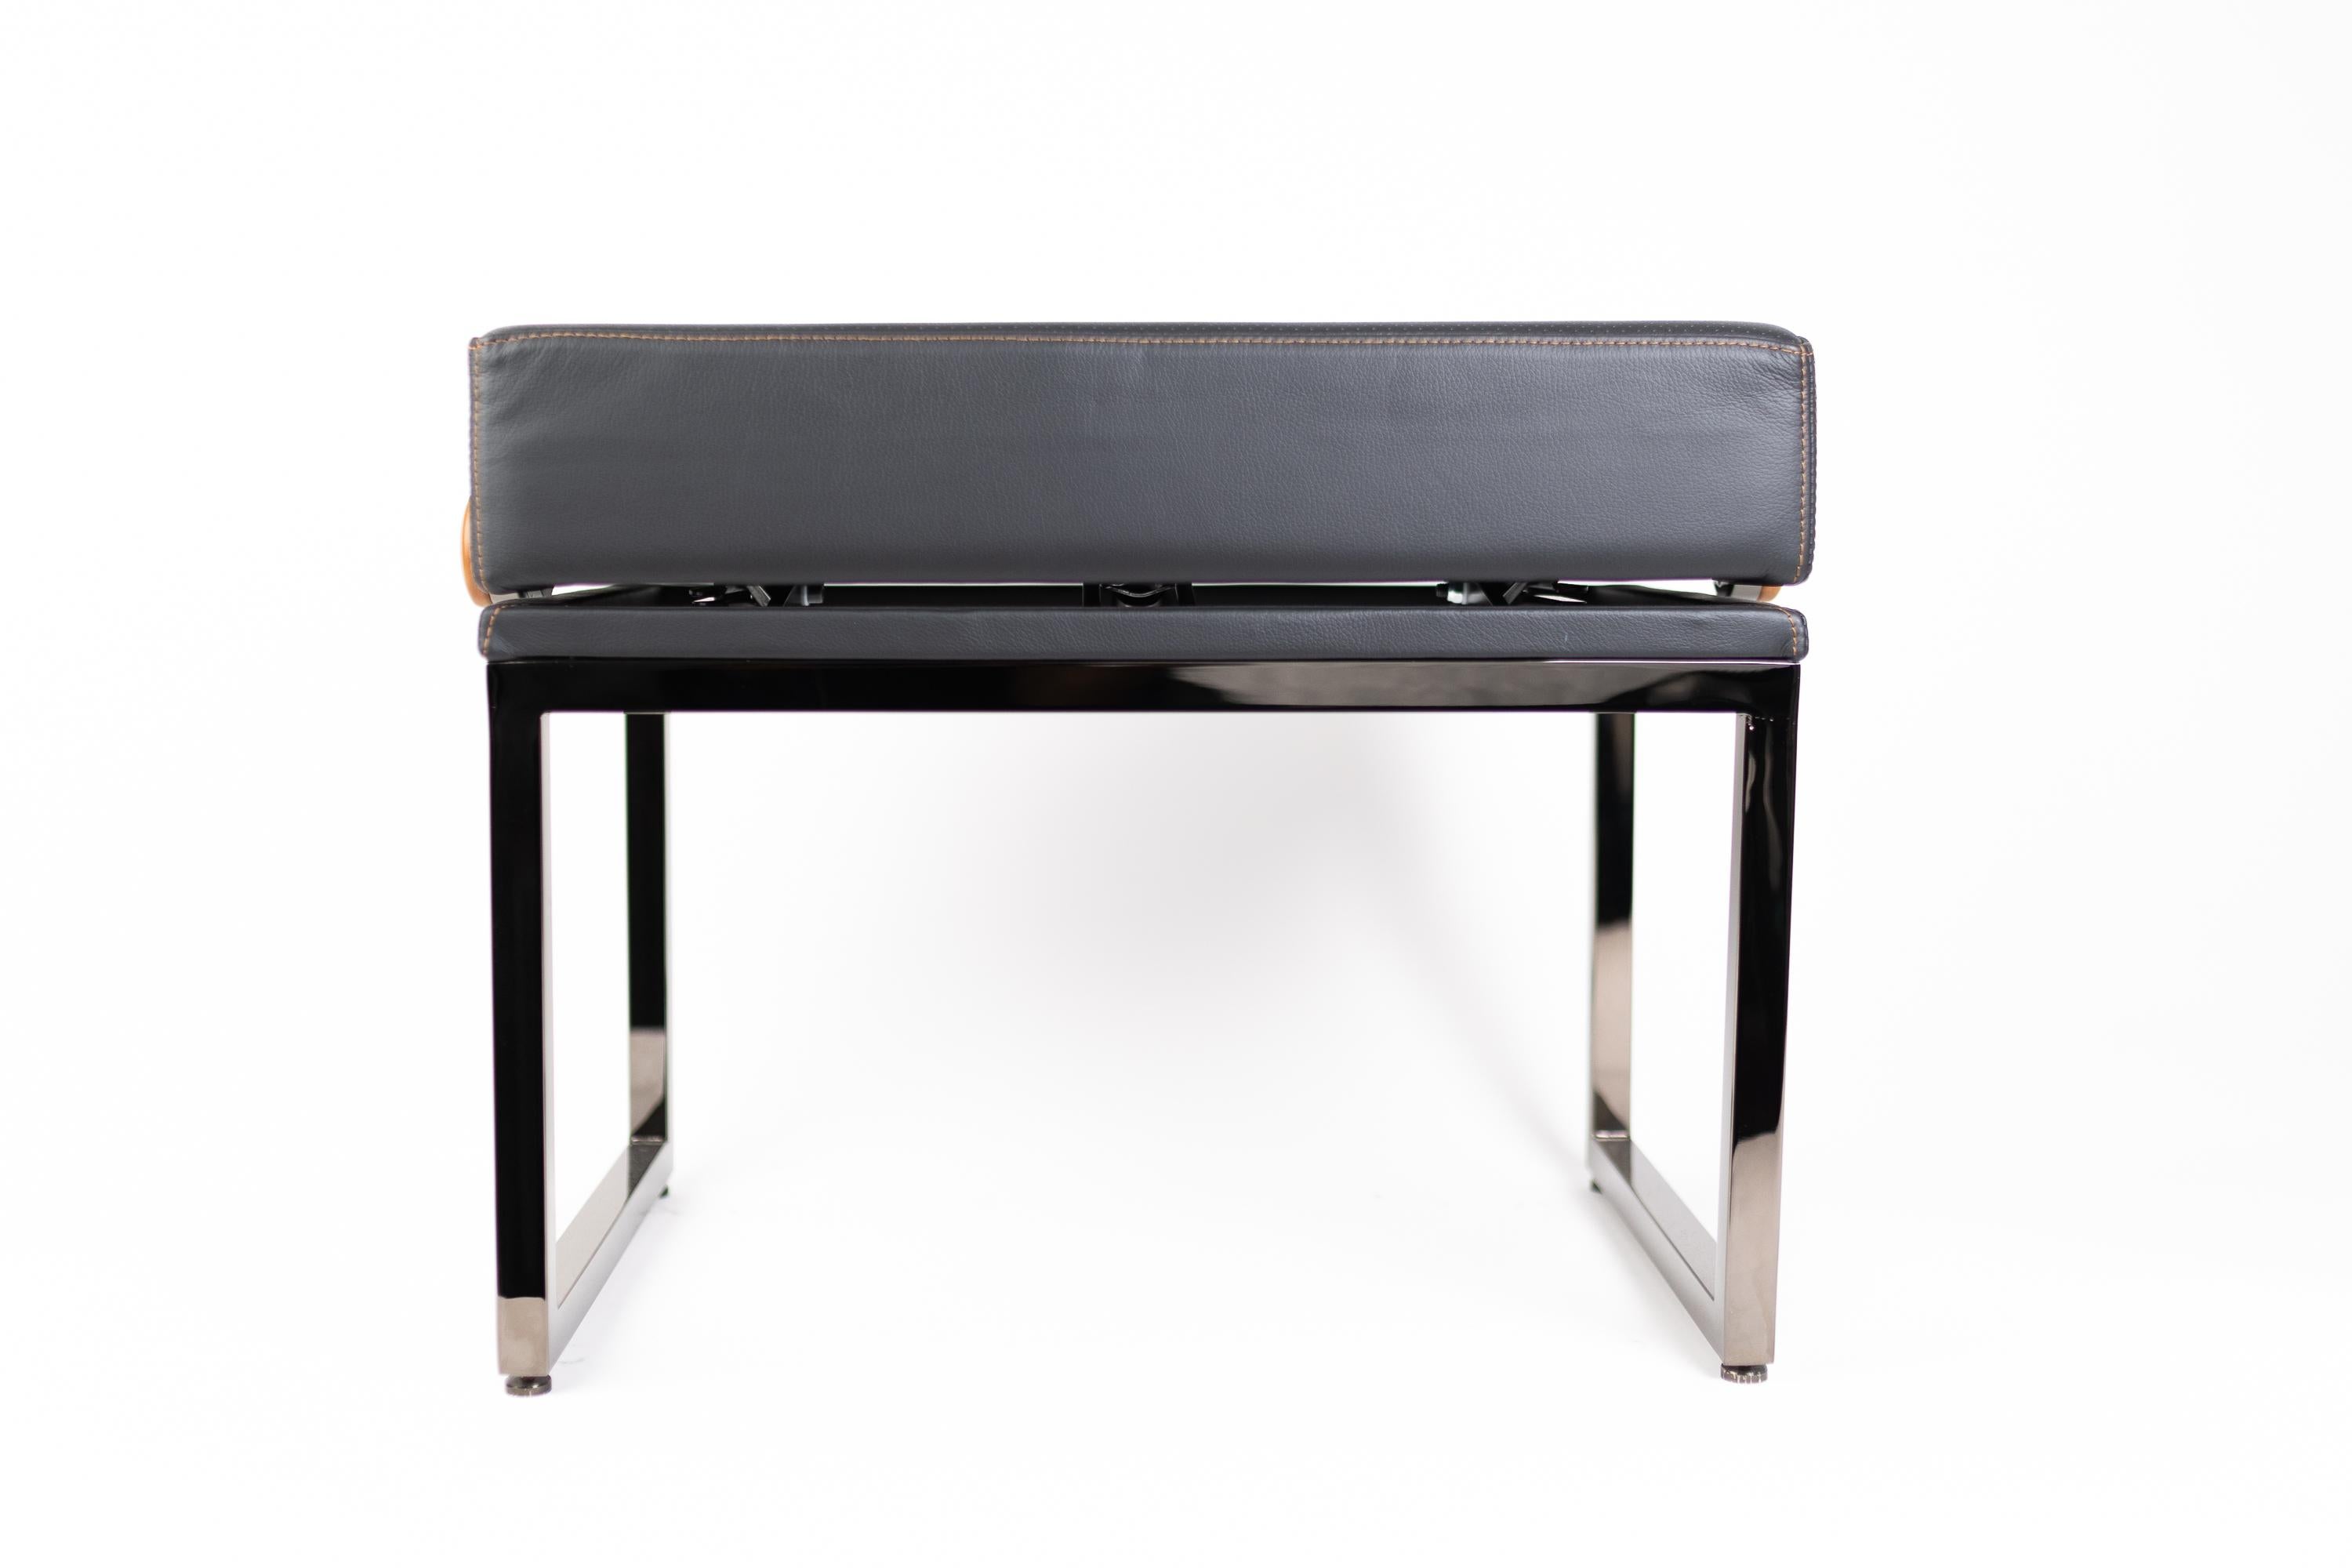 European Upholstered Piano Bench Plated in black Nickel, Height Adjustable Piano Stool For Sale